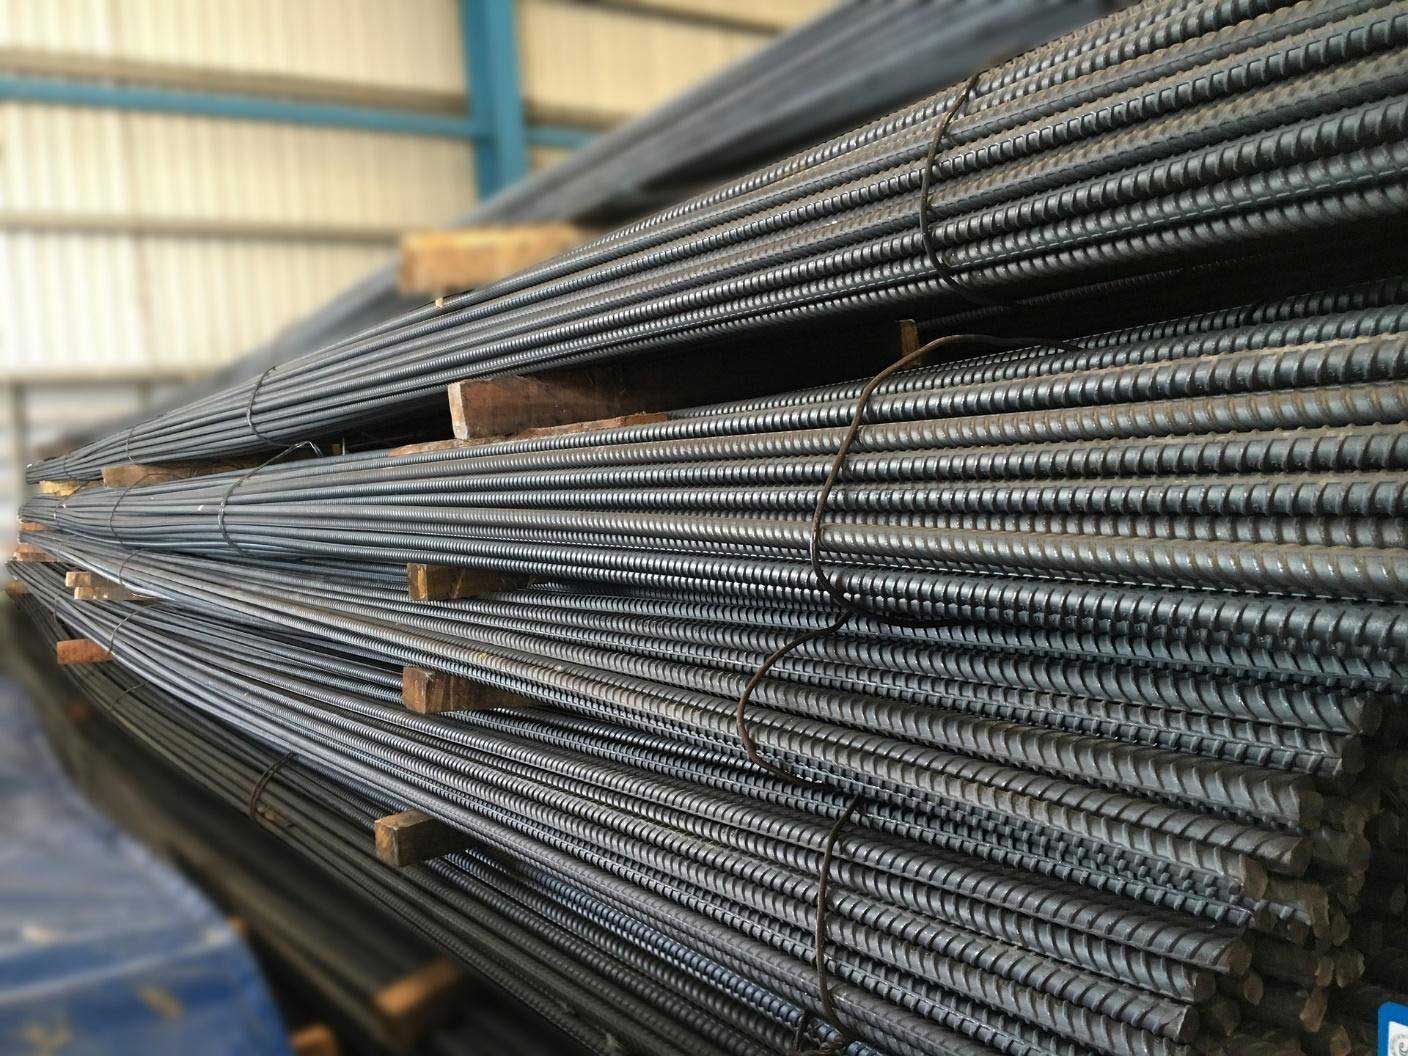 Why Should You Use Corrosion Resistant TMT Bar?